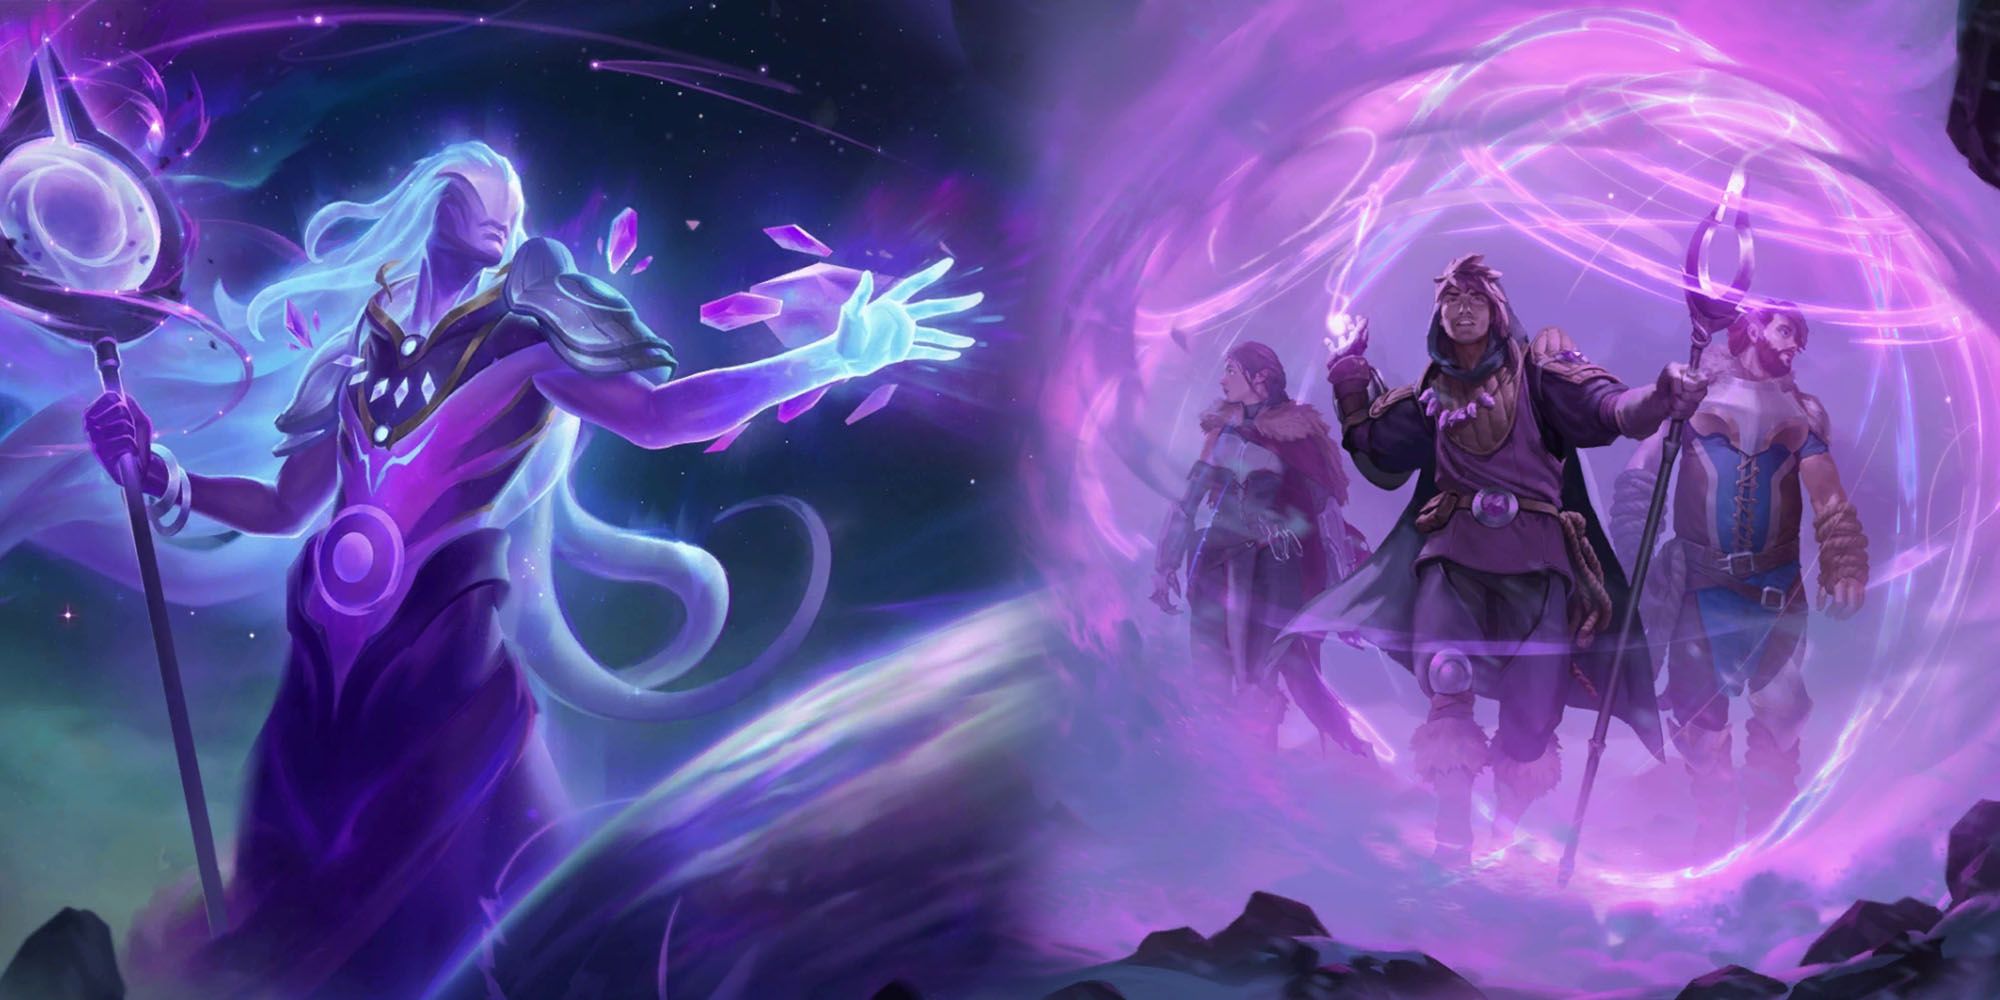 League Of Legends - Tyari the Traveler and his companions next to a depection of the Celestial Traveler